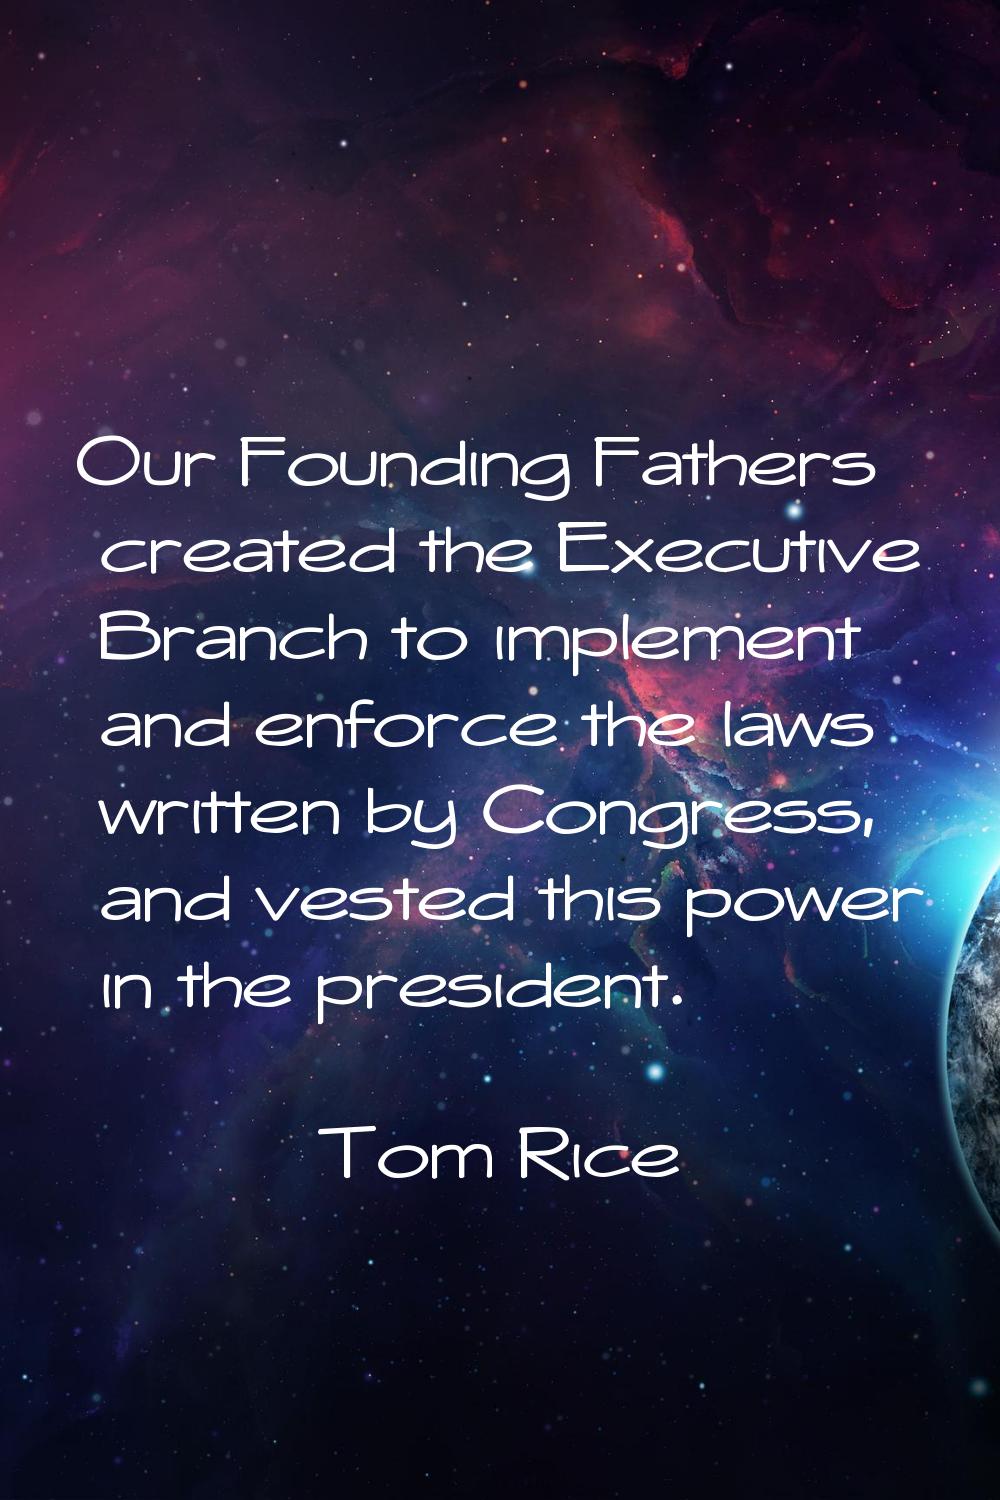 Our Founding Fathers created the Executive Branch to implement and enforce the laws written by Cong